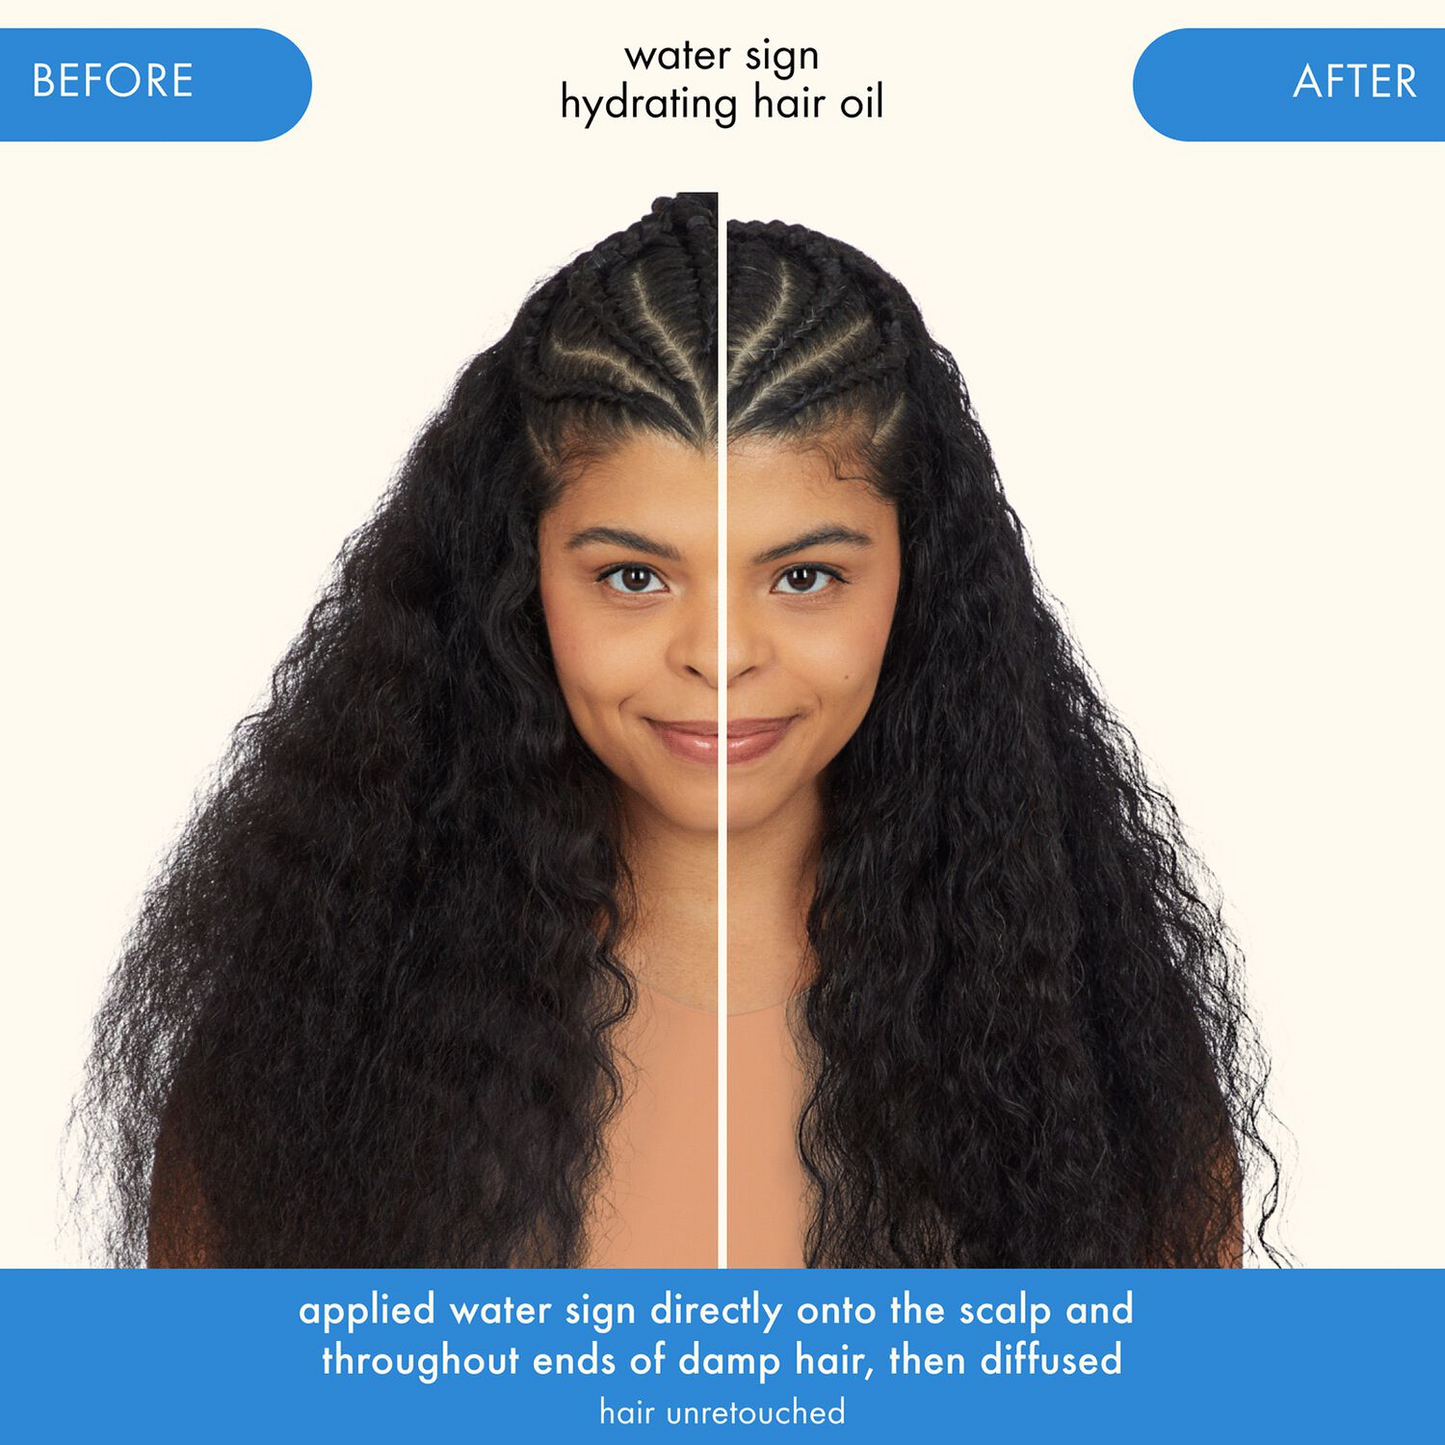 amika - Water Sign Hydrating Hair Oil